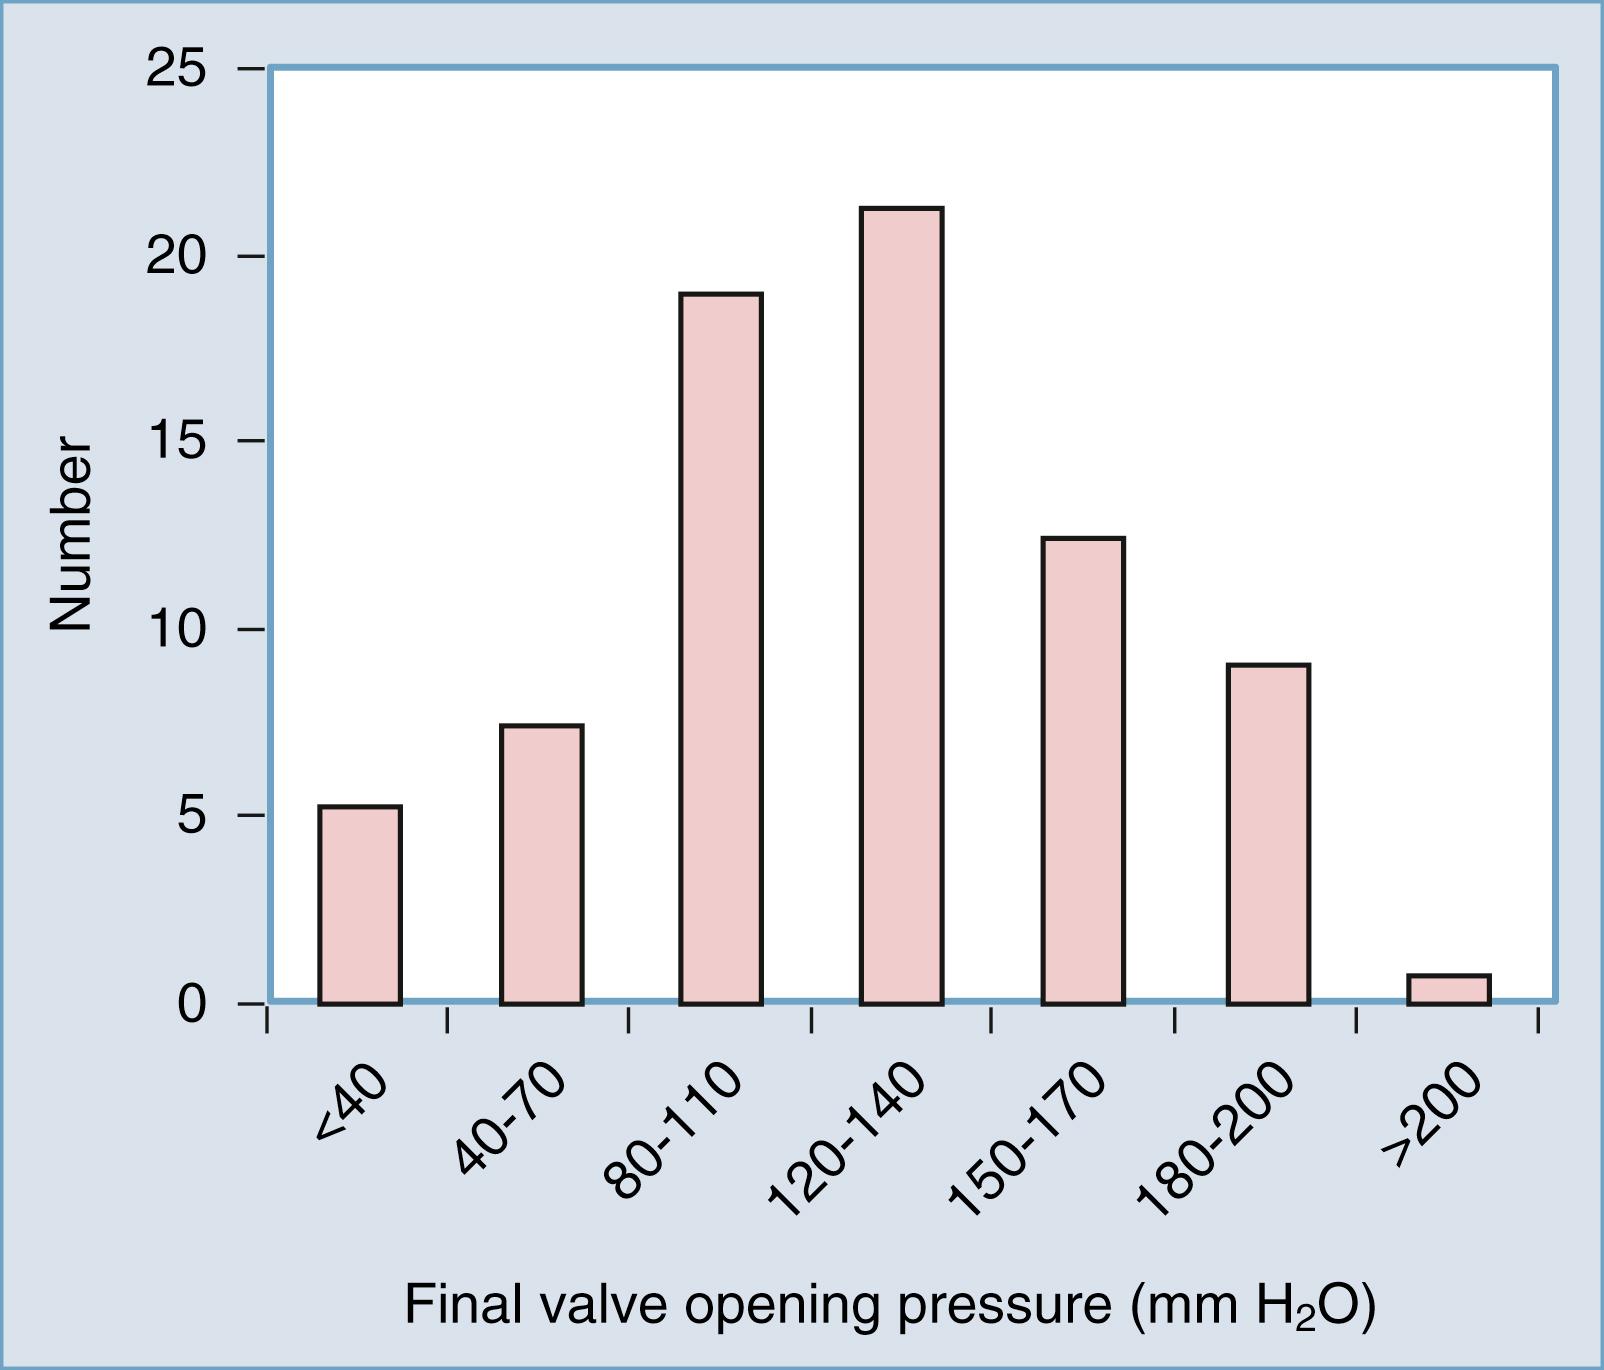 Figure 44.2, Range of valve opening pressures in the treatment of idiopathic normal-pressure hydrocephalus (iNPH).